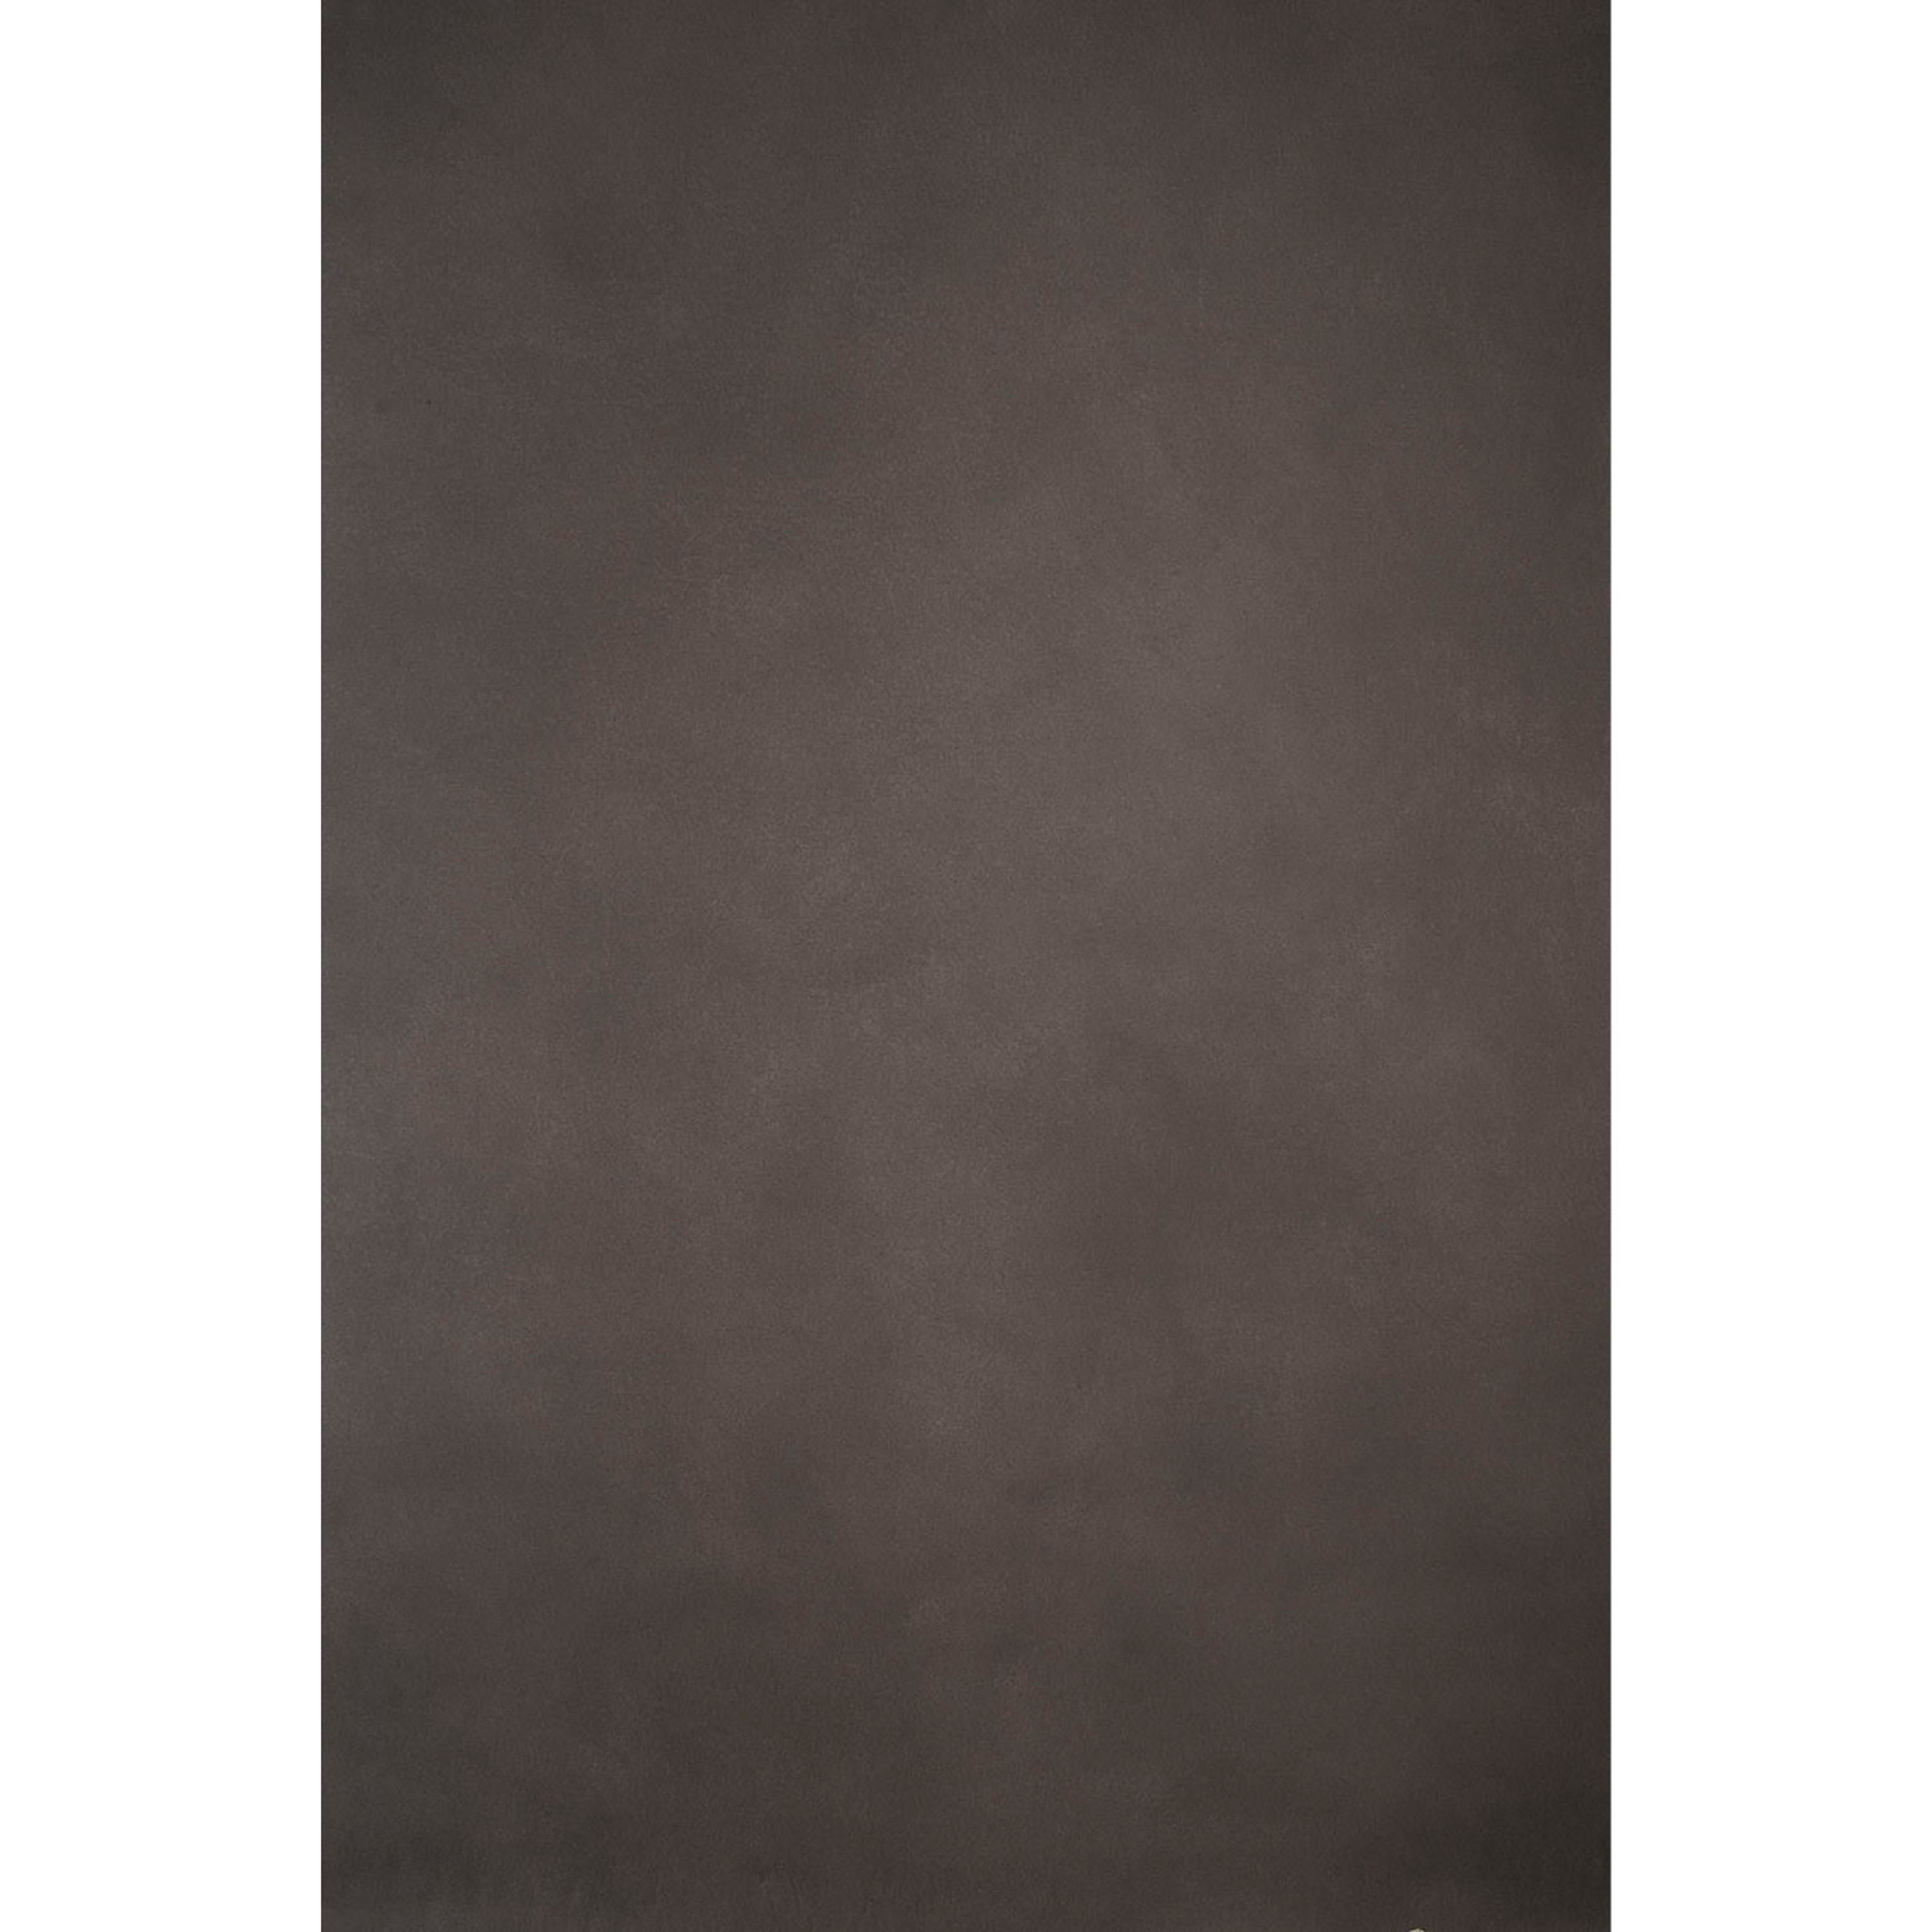 Gravity Backdrops Mid Gray Low Texture LG (SN: 9619)